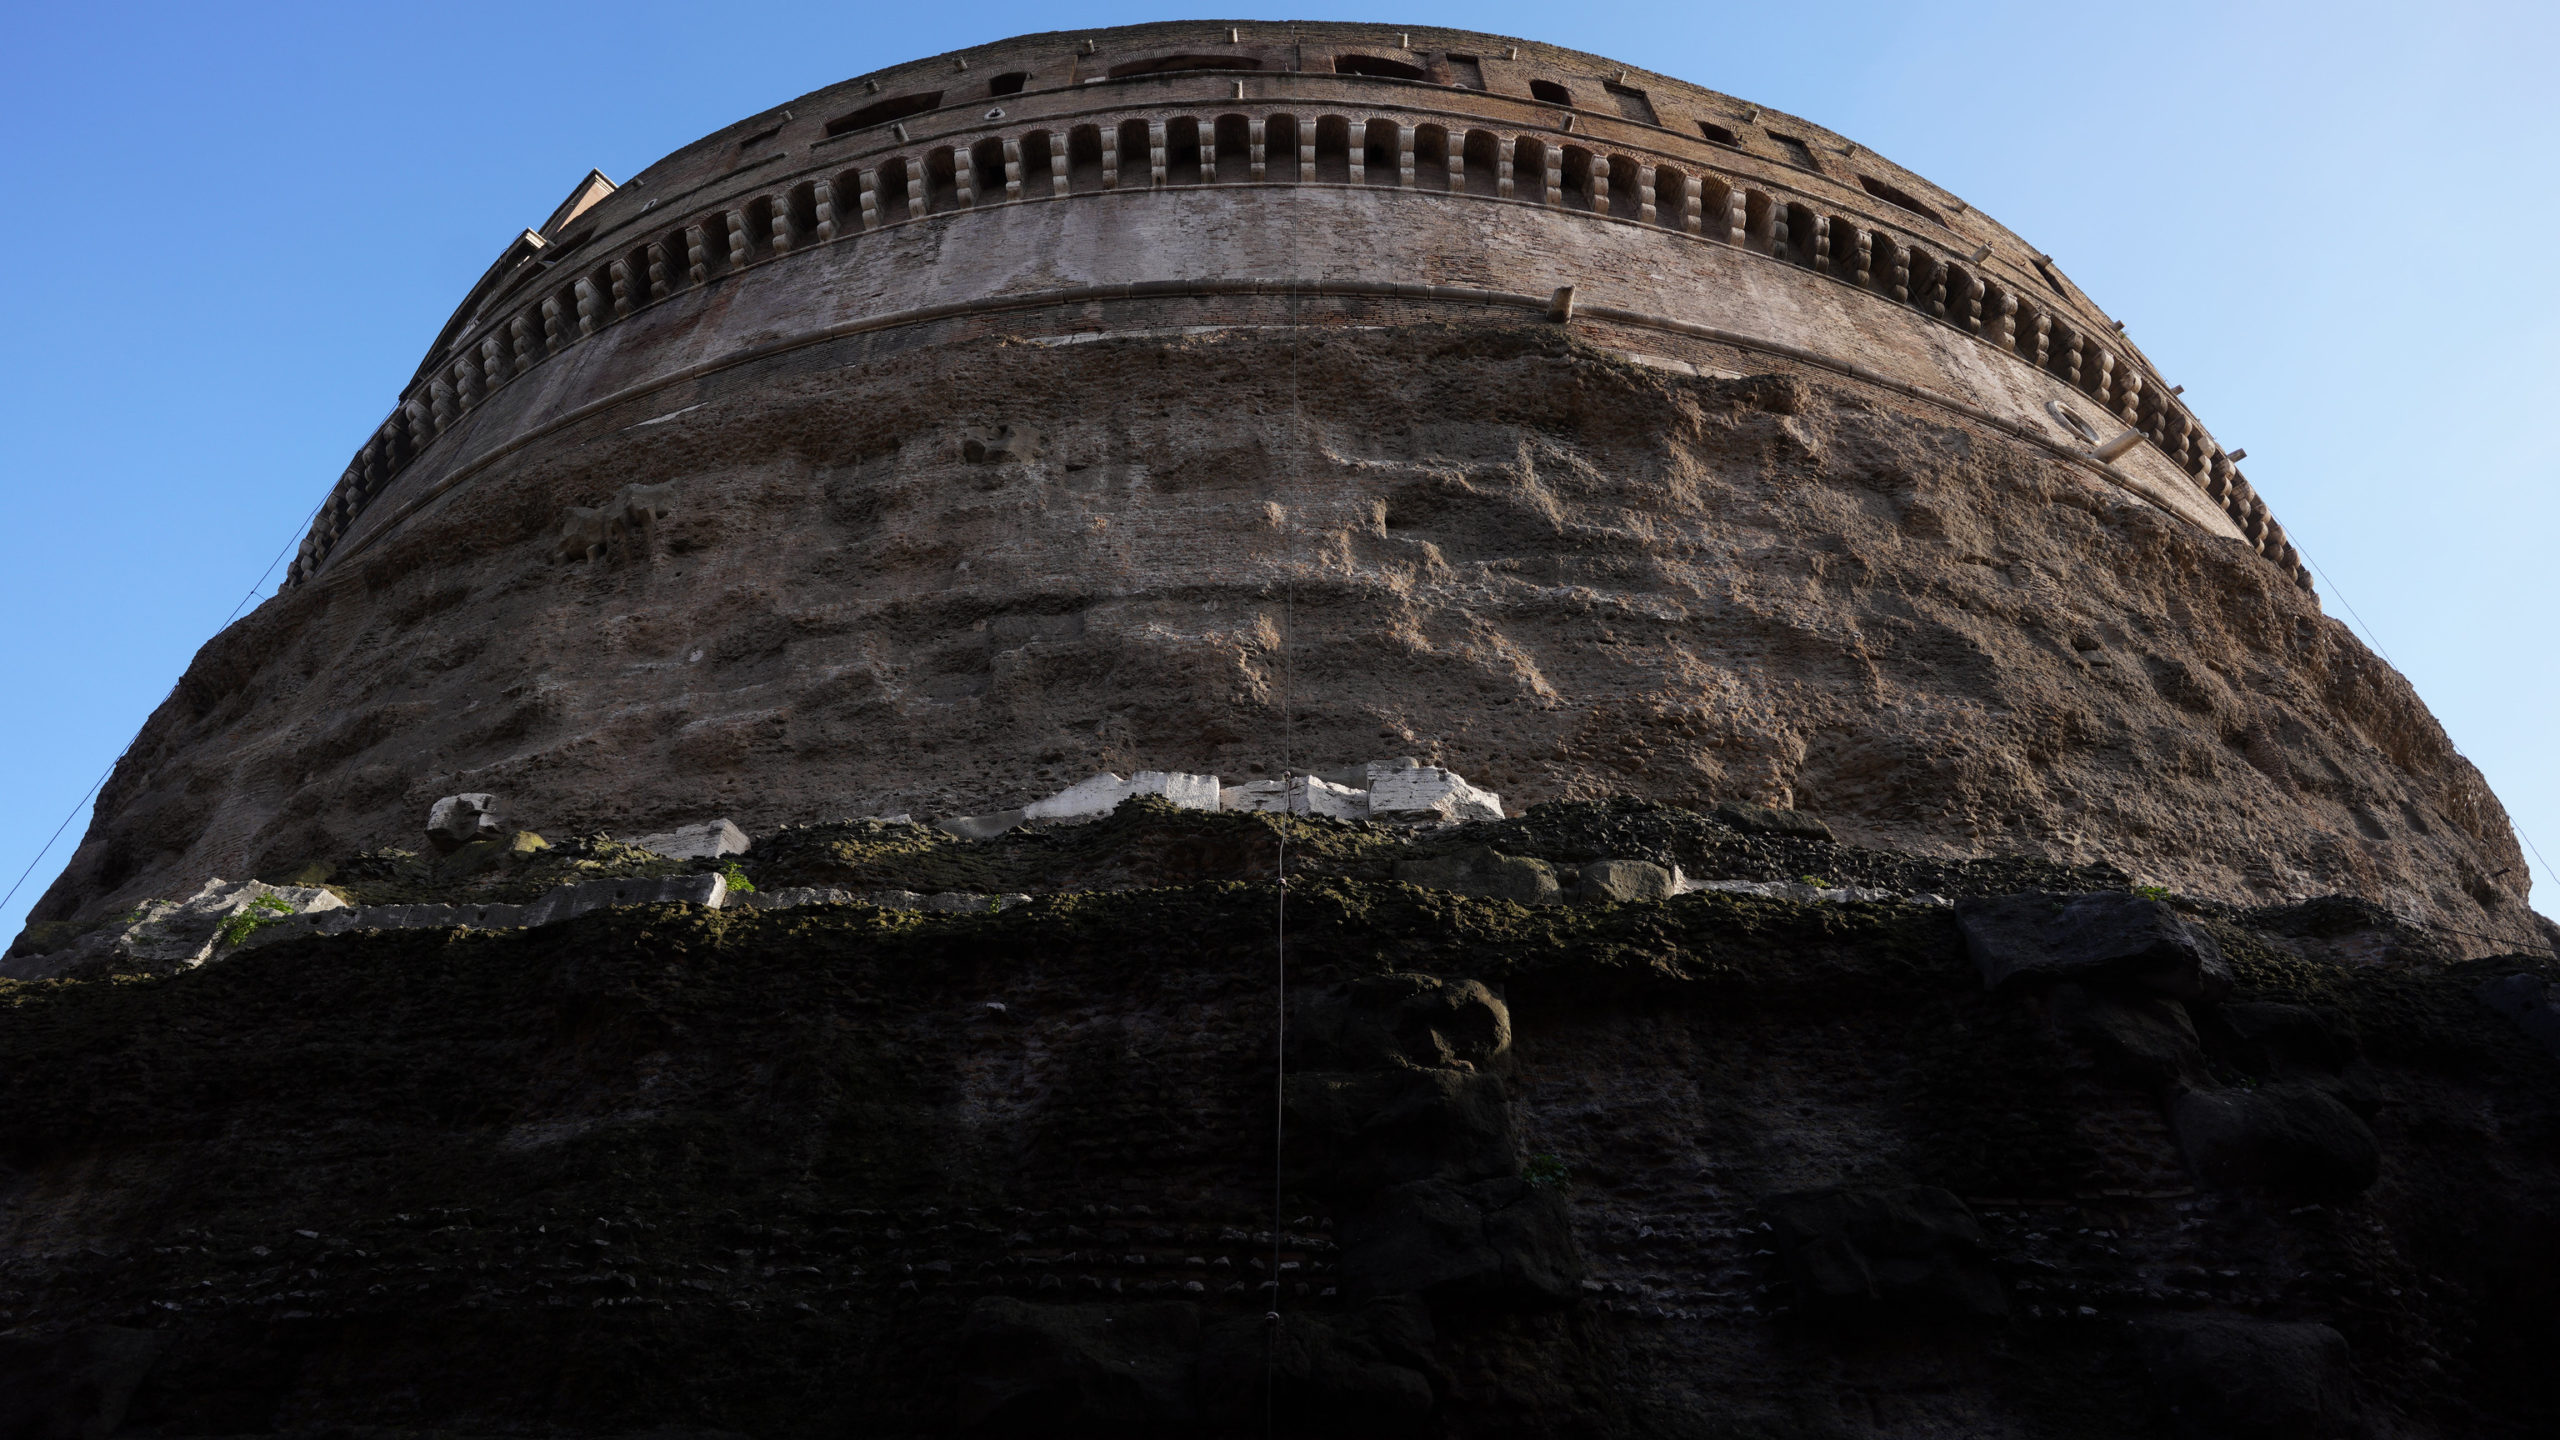 Medieval fortifications and traces of ancient travertine cladding, Mausoleum of Hadrian (Castel Sant'Angelo), Rome